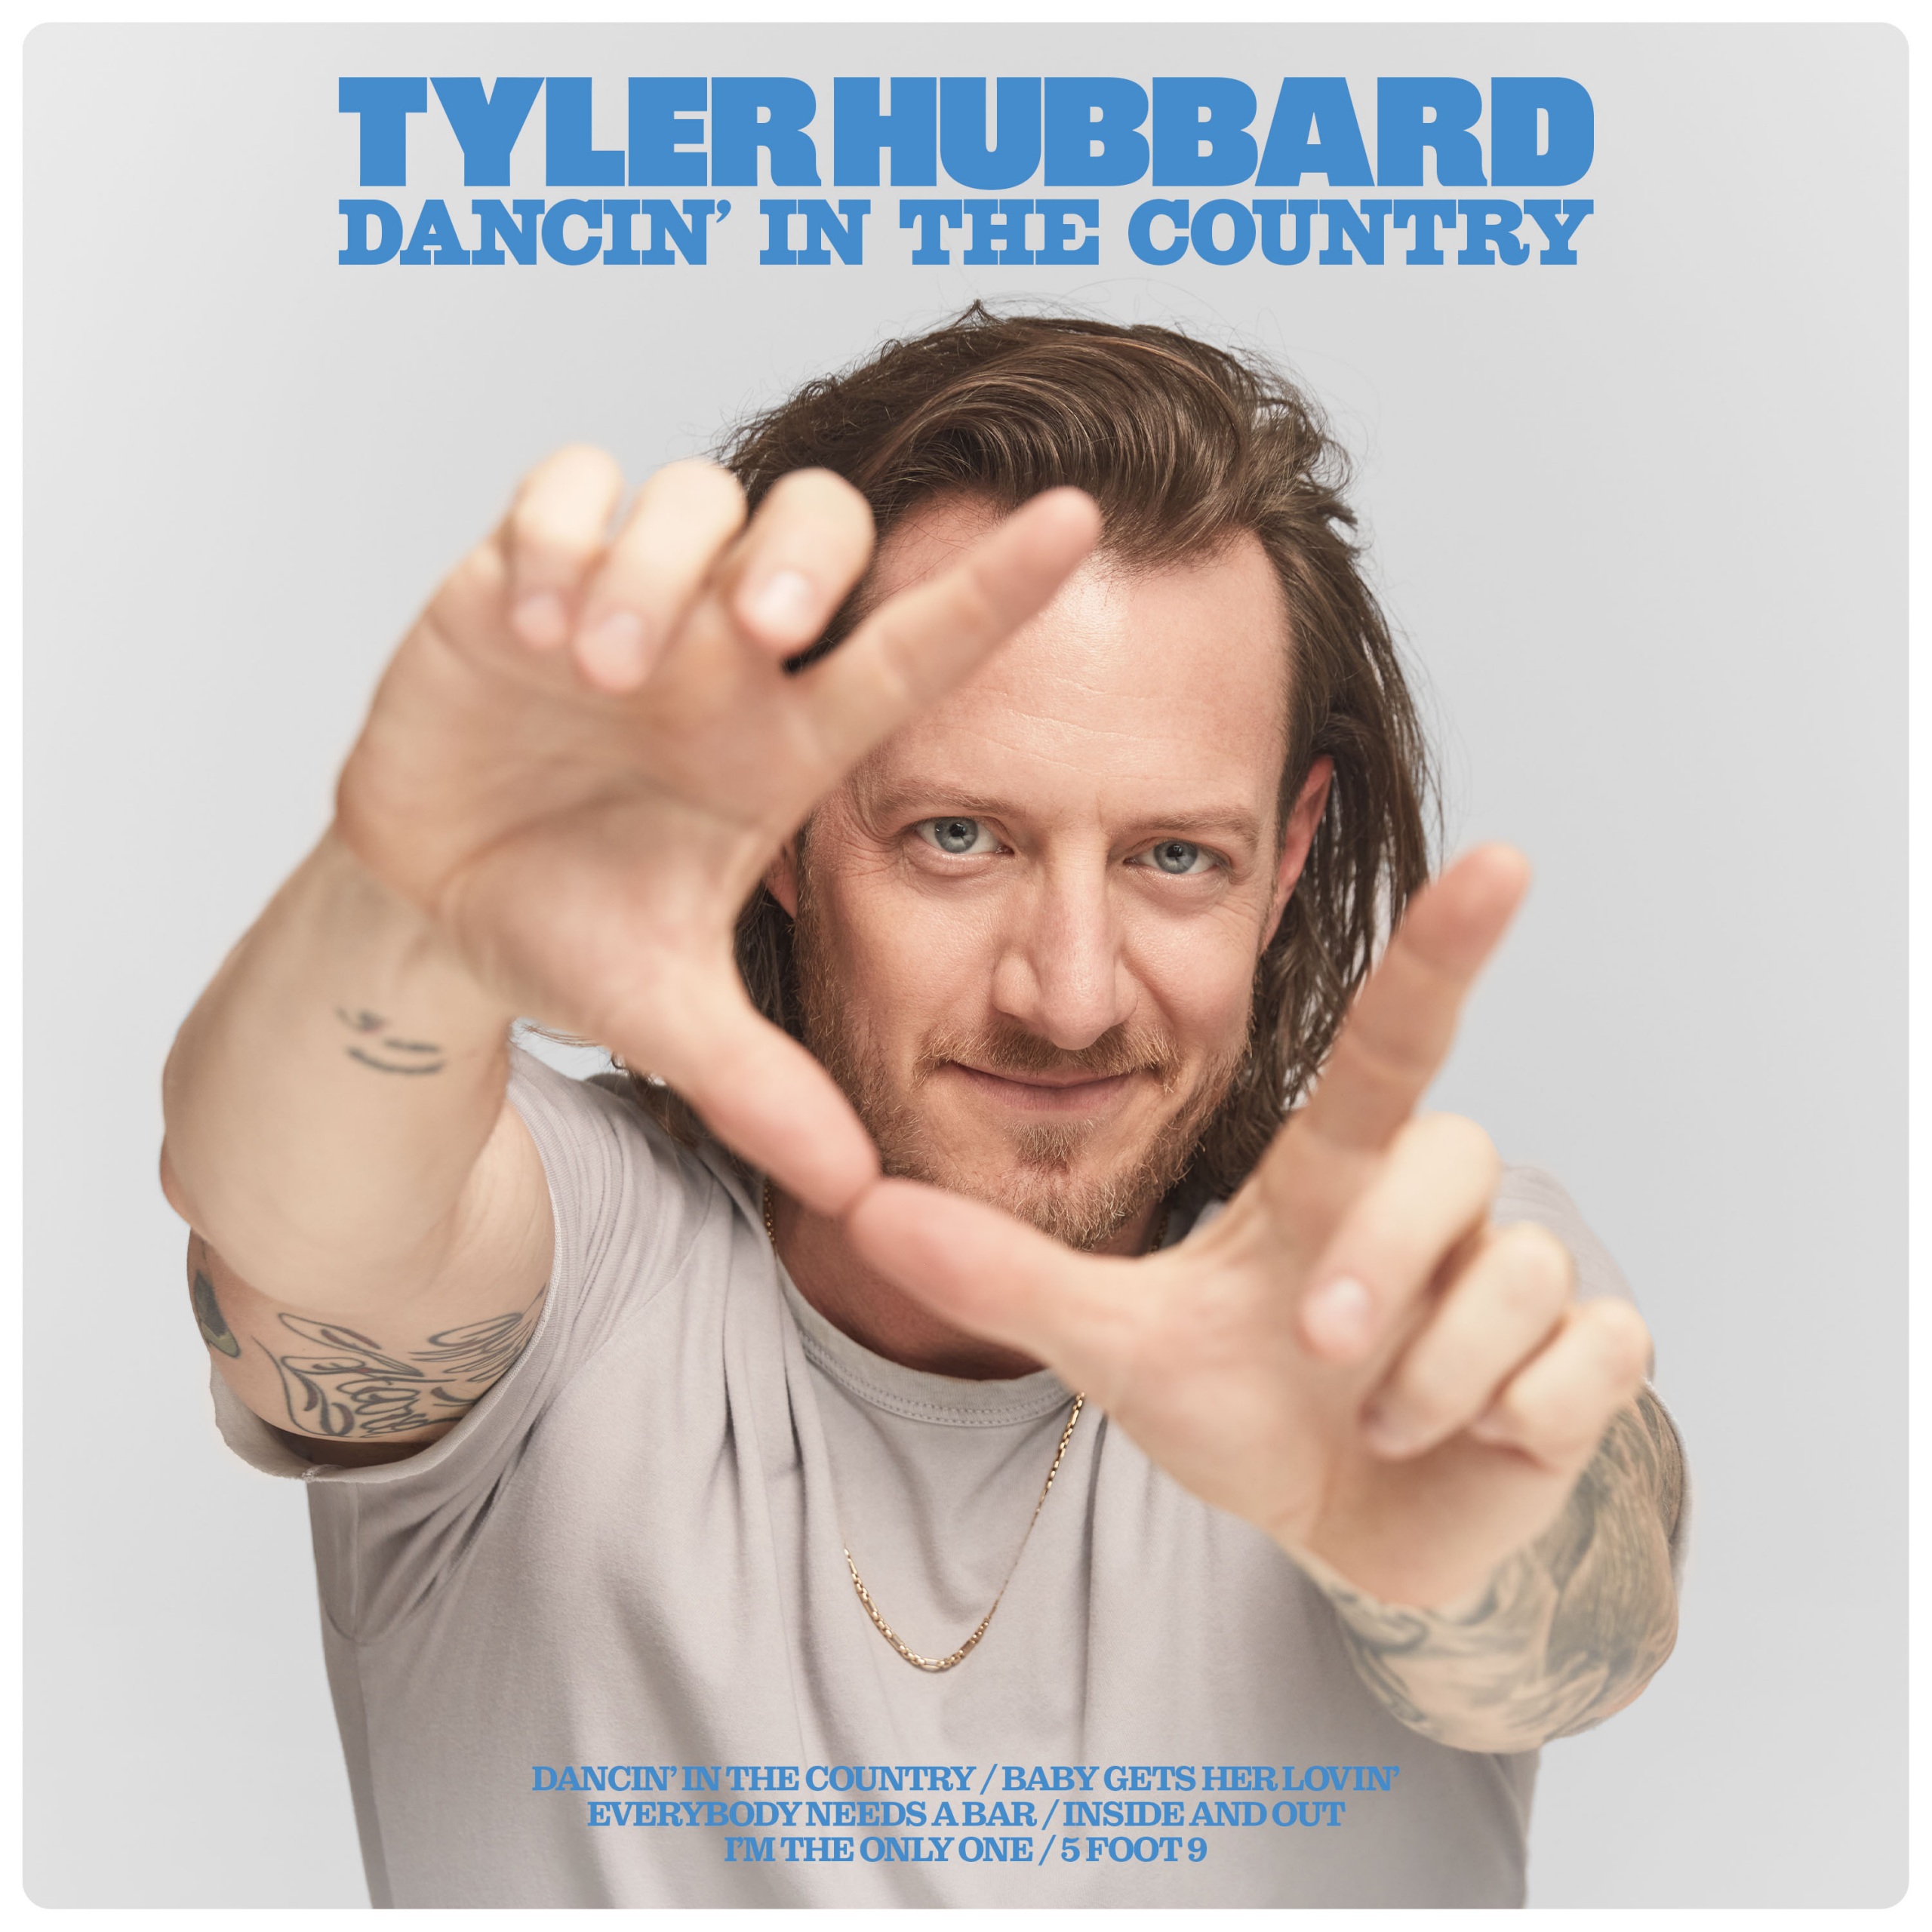 Pressroom TYLER HUBBARD’S DEBUT SOLO ALBUM TO DROP JANUARY 27TH